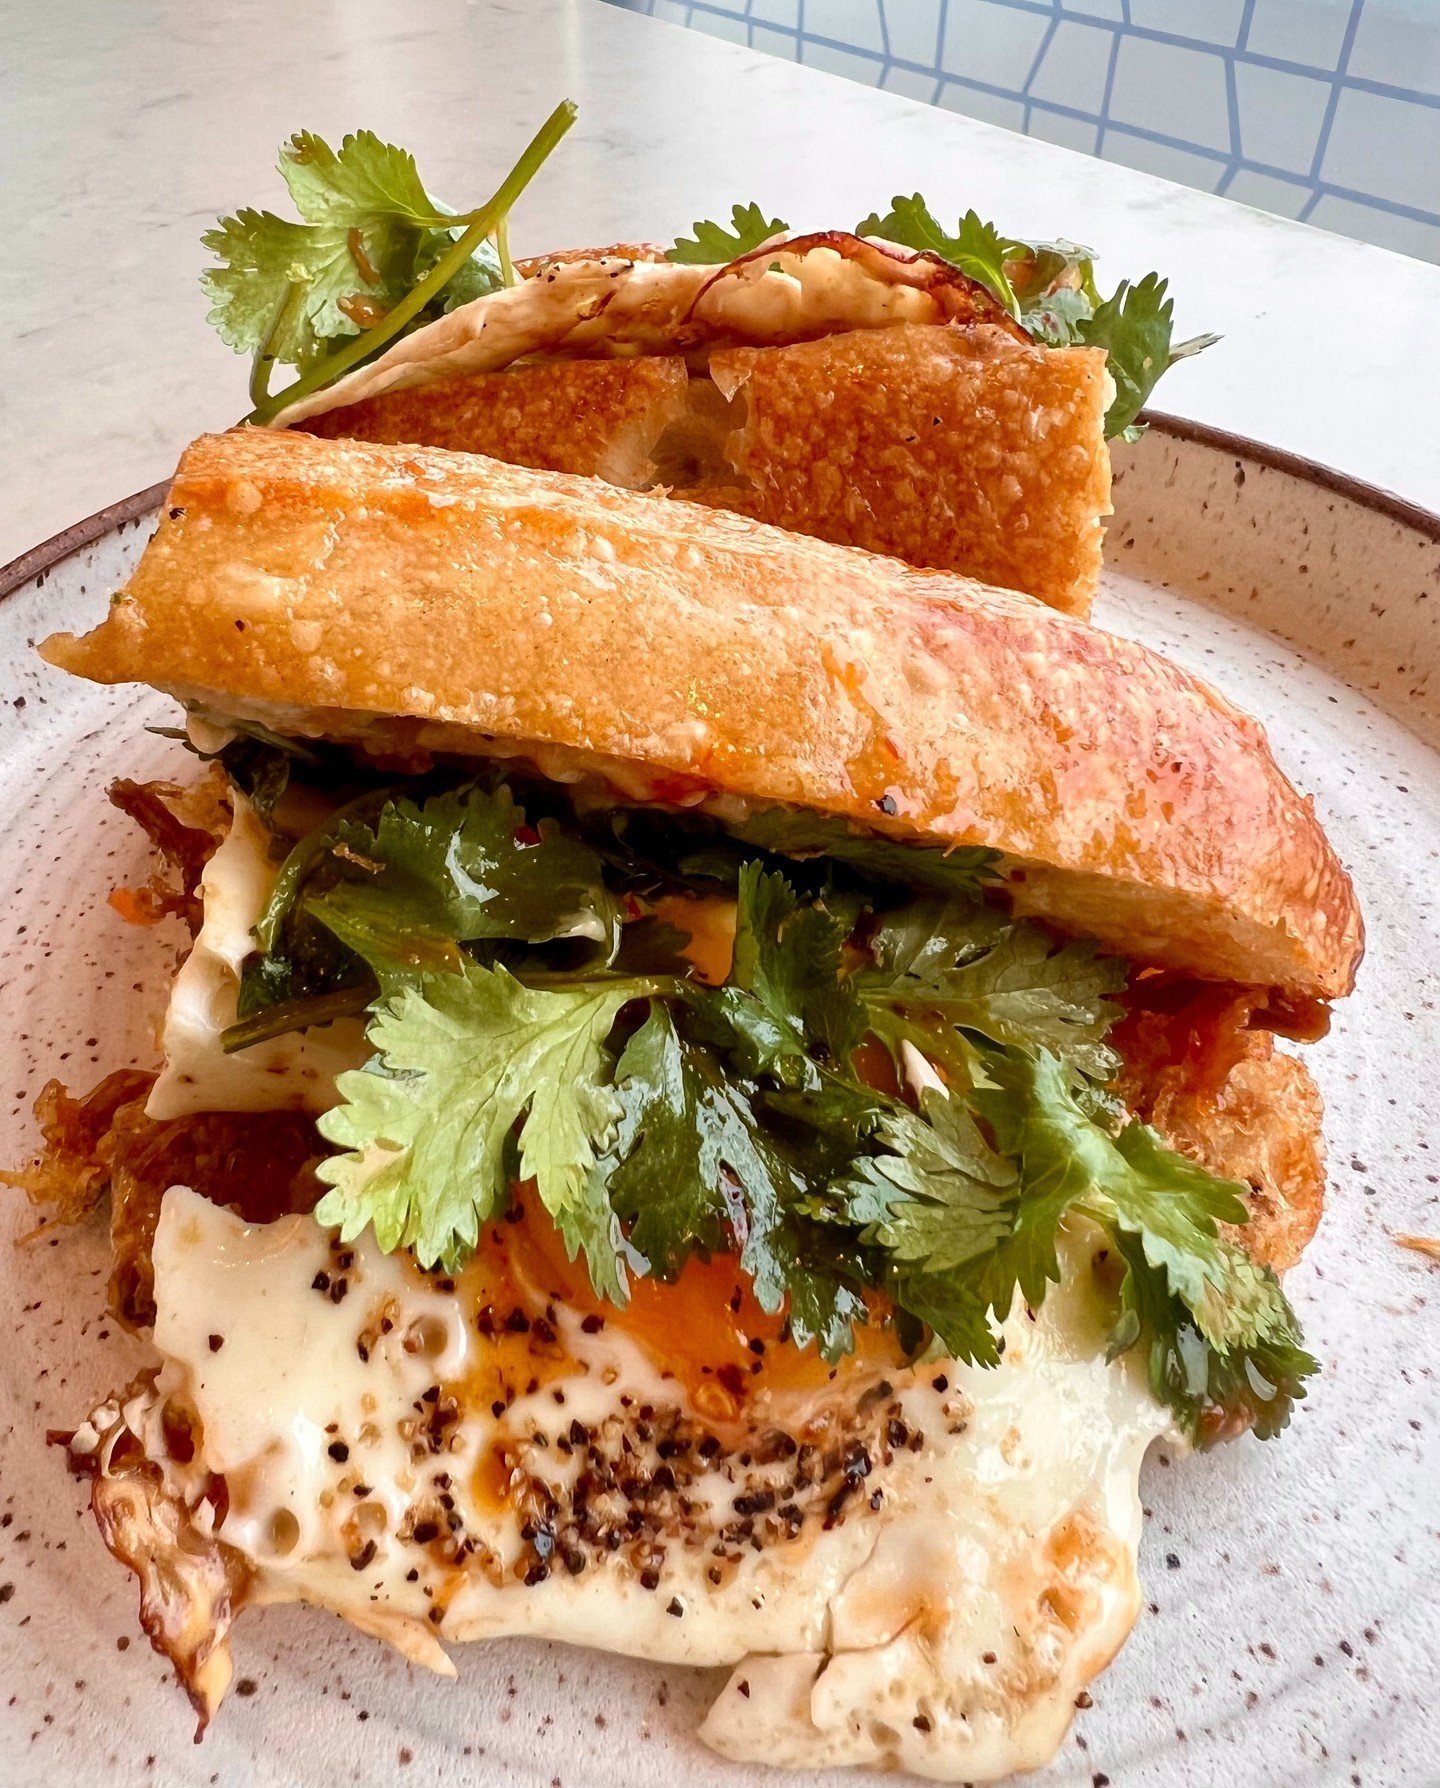 Need a Saturday Morning Eggy Banh Mi? (i.e. the best hangover cure! 🤕)🍳🥖
We're here 11am til 9pm today!